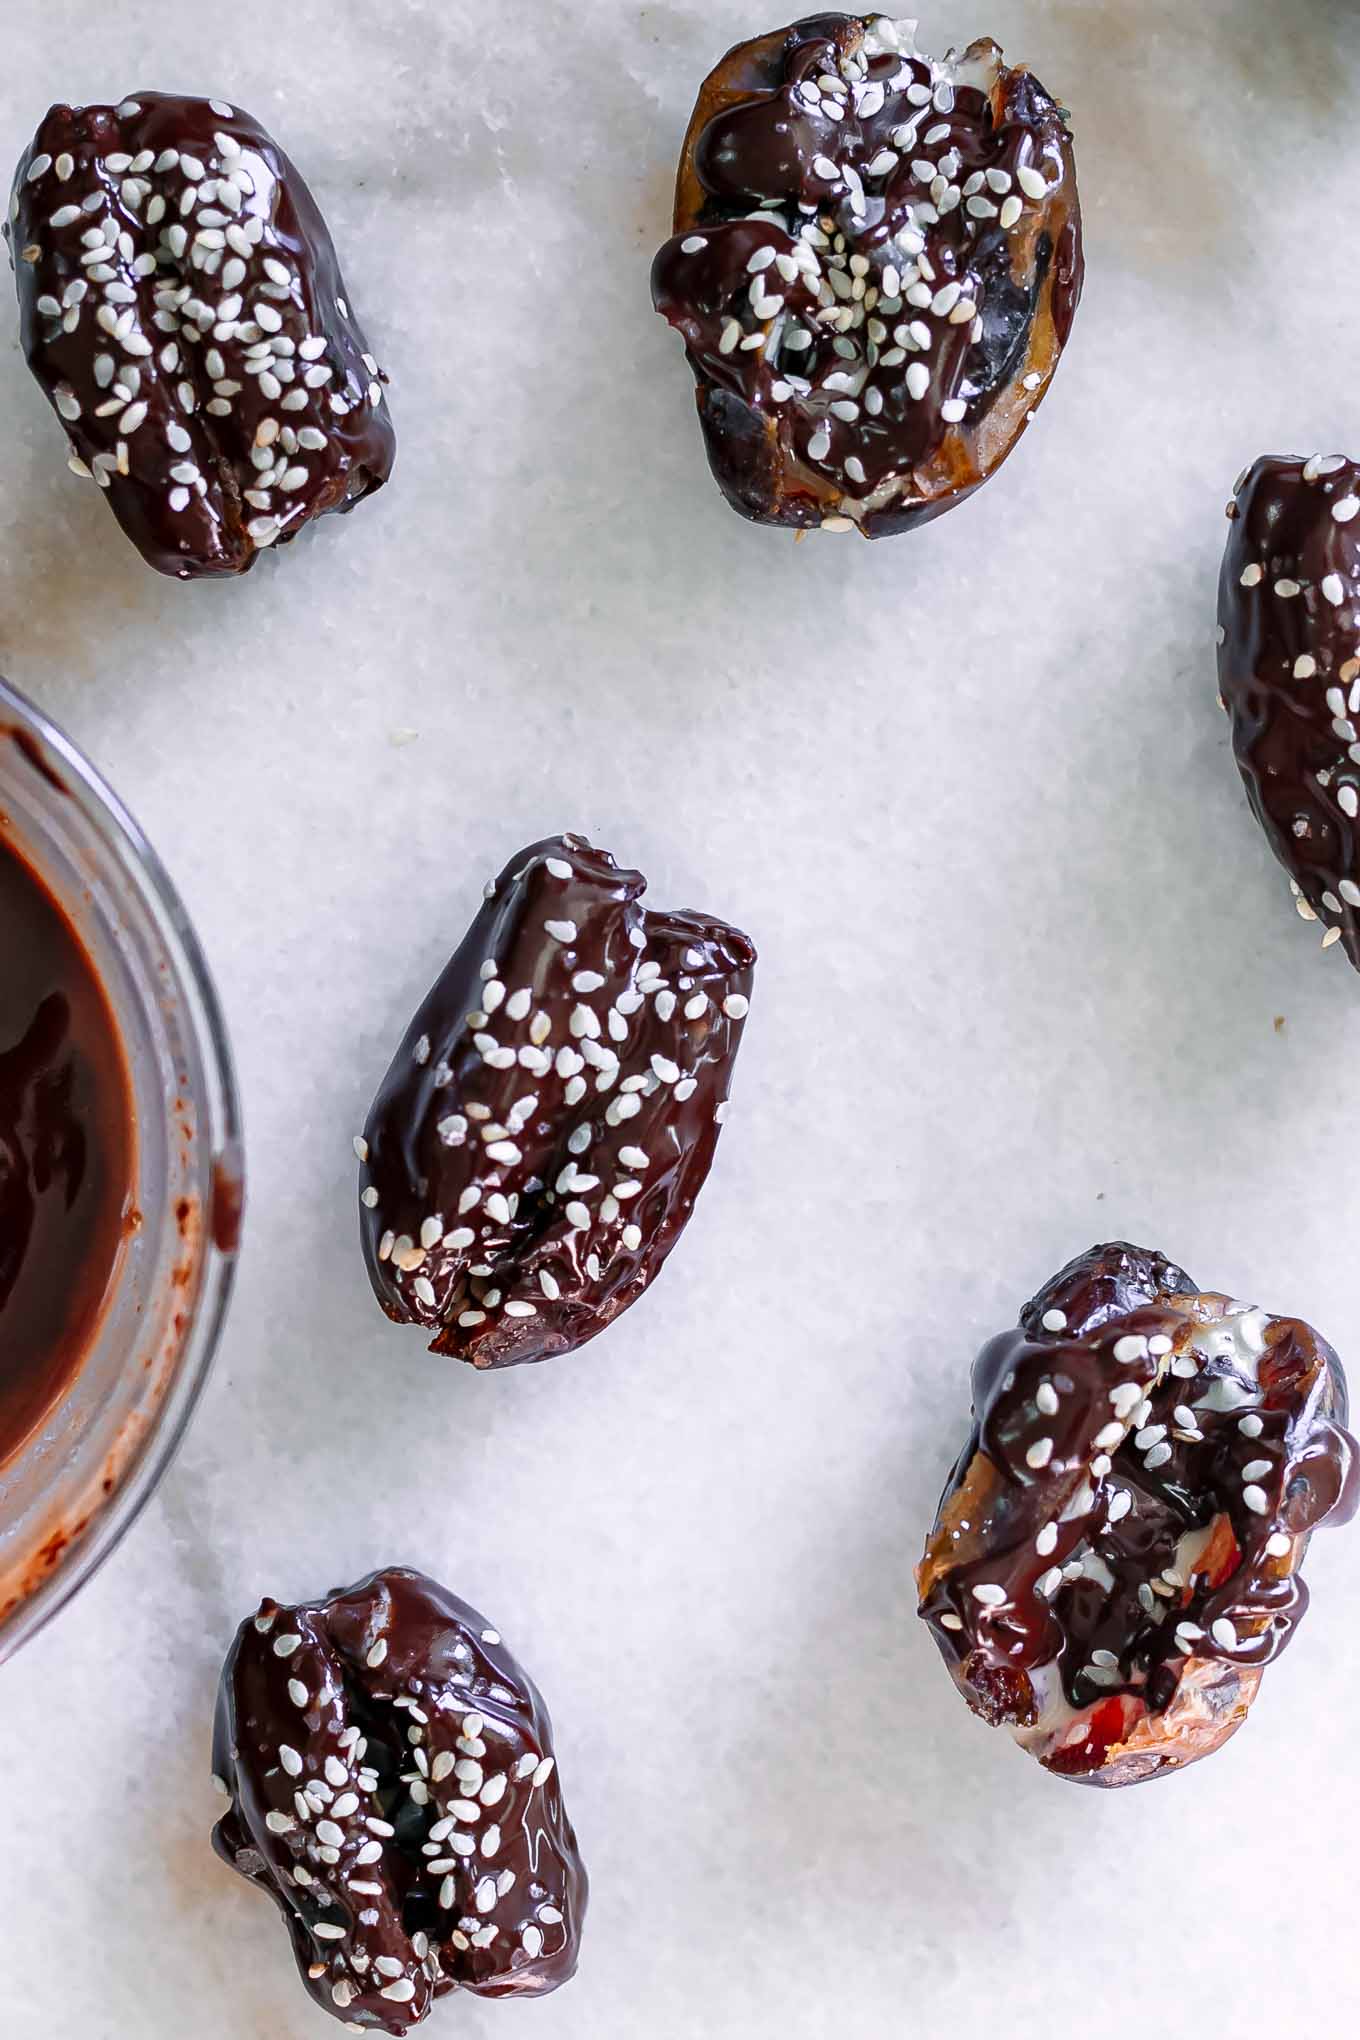 chocolate covered dates stuffed with tahini on a white table